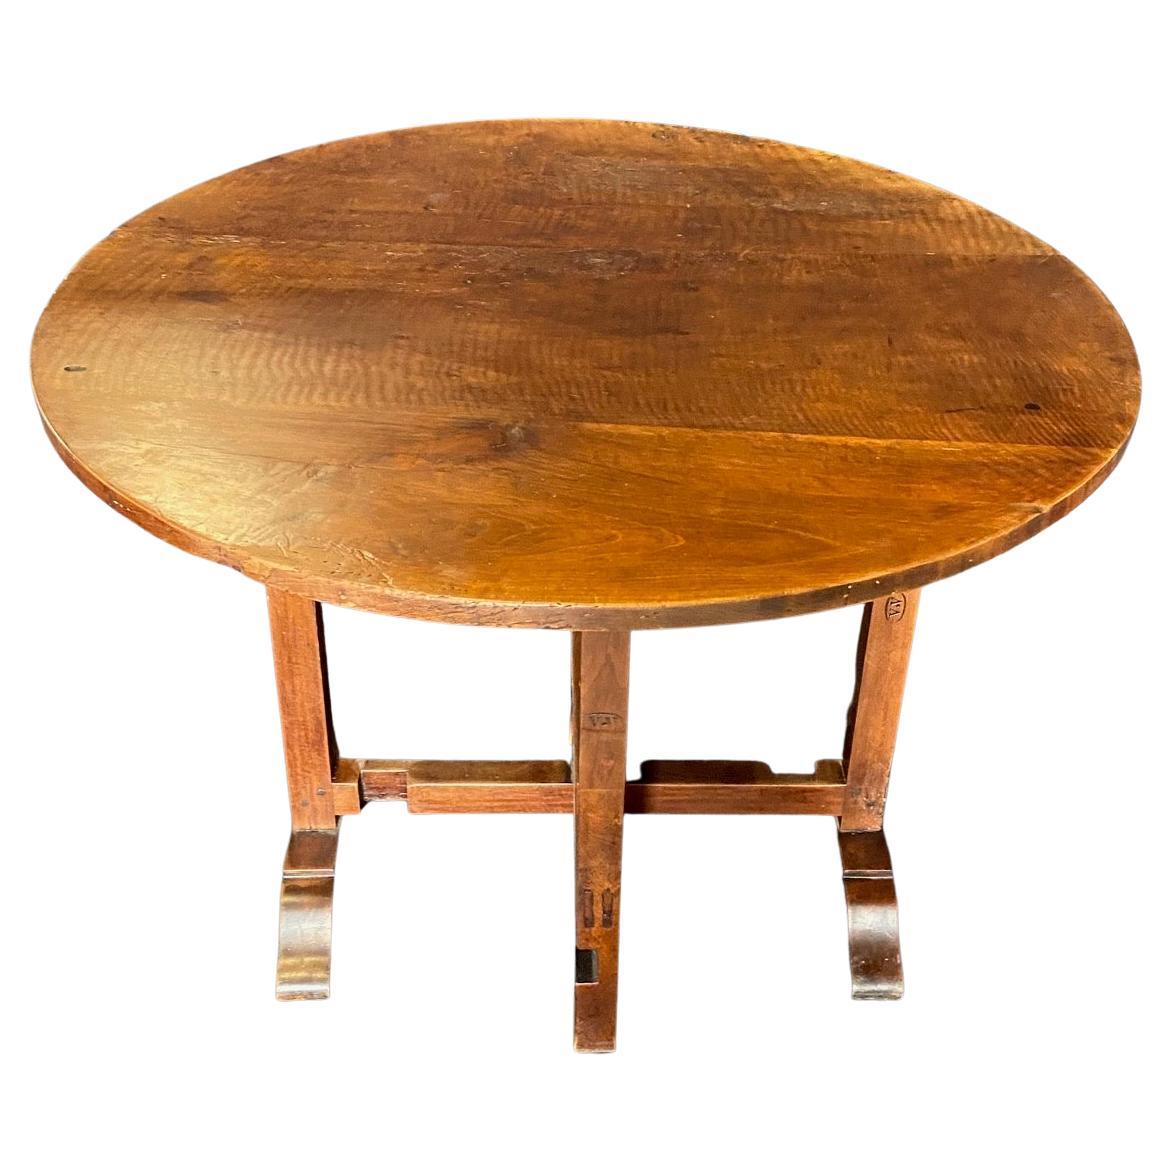  French Early 19th Century Vigneron or Tilt-Top Walnut Wine Tasting Dining Table For Sale